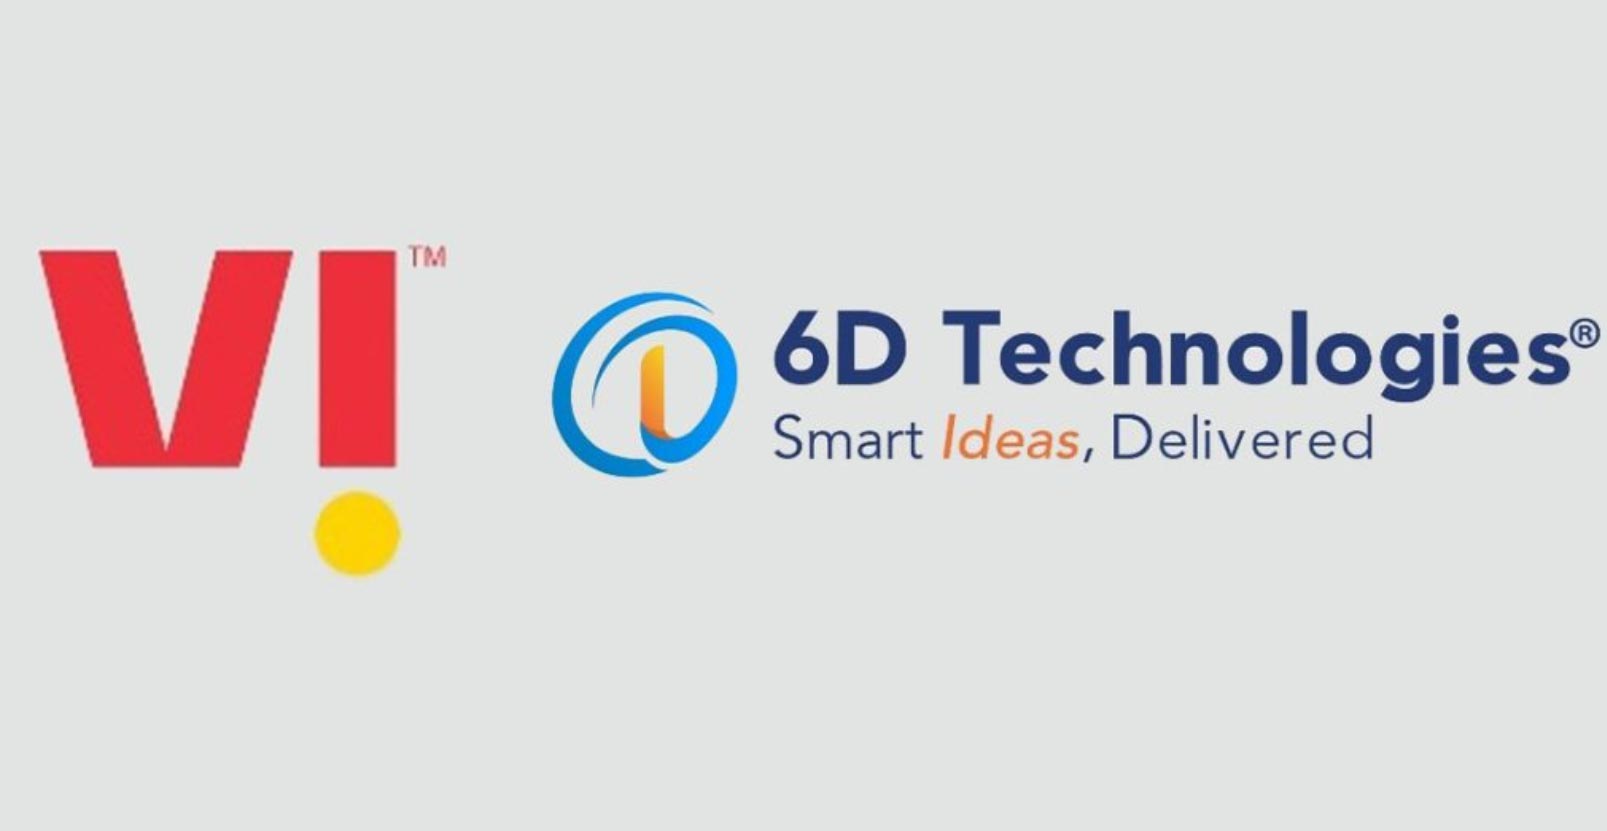 Vodafone Idea (VI) teams up with homegrown 6D Technologies to expand its IoT offerings